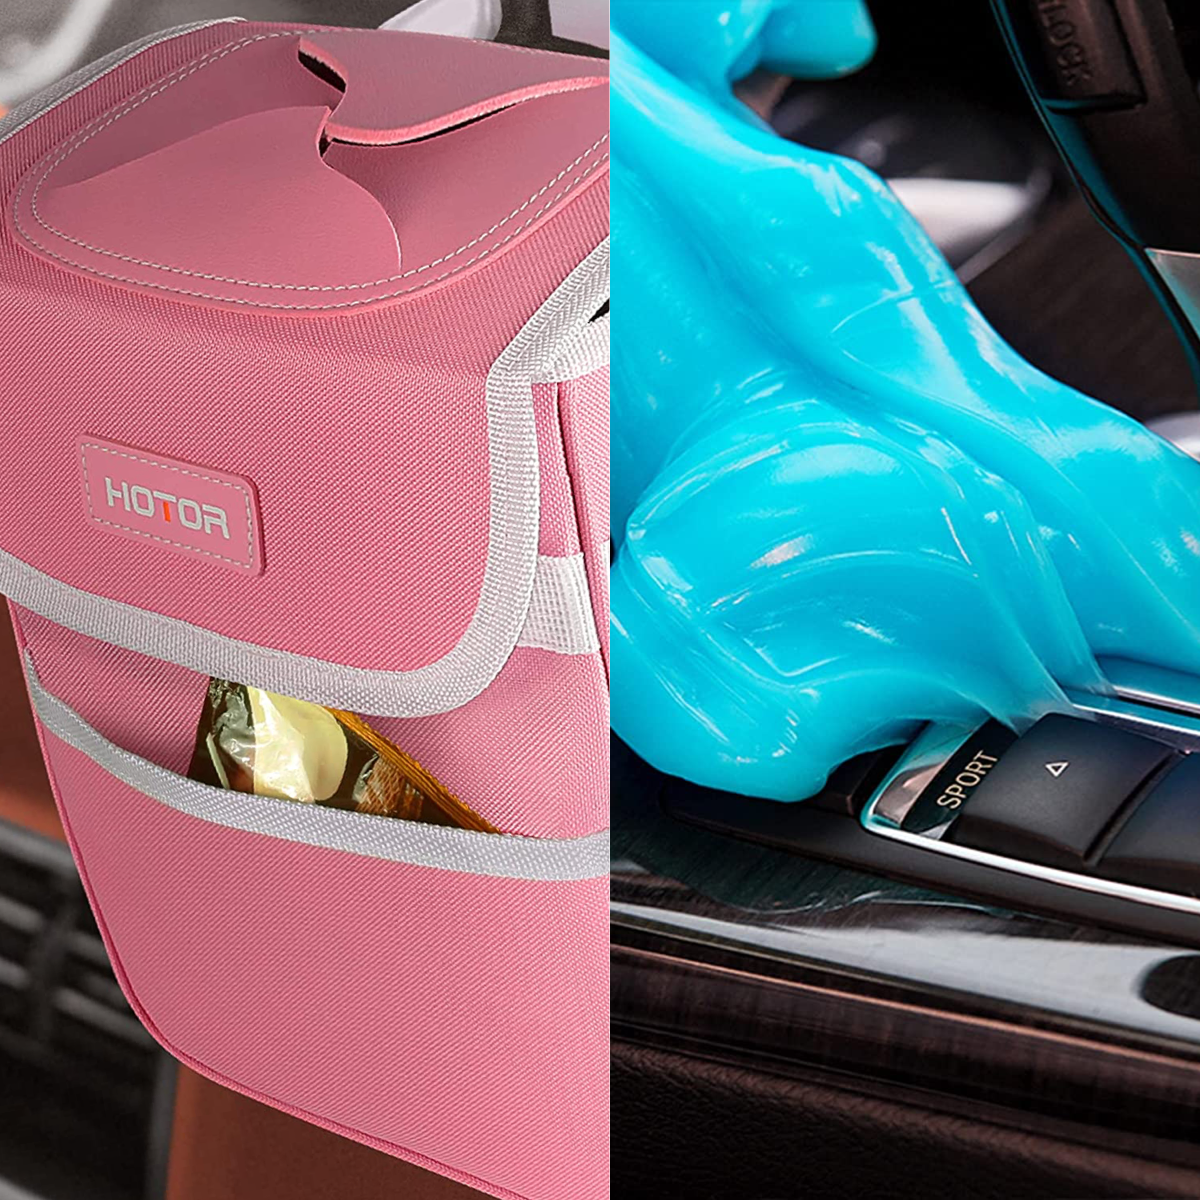 5 Cute Car Accessories To Keep Your Vehicle Looking Its Best –